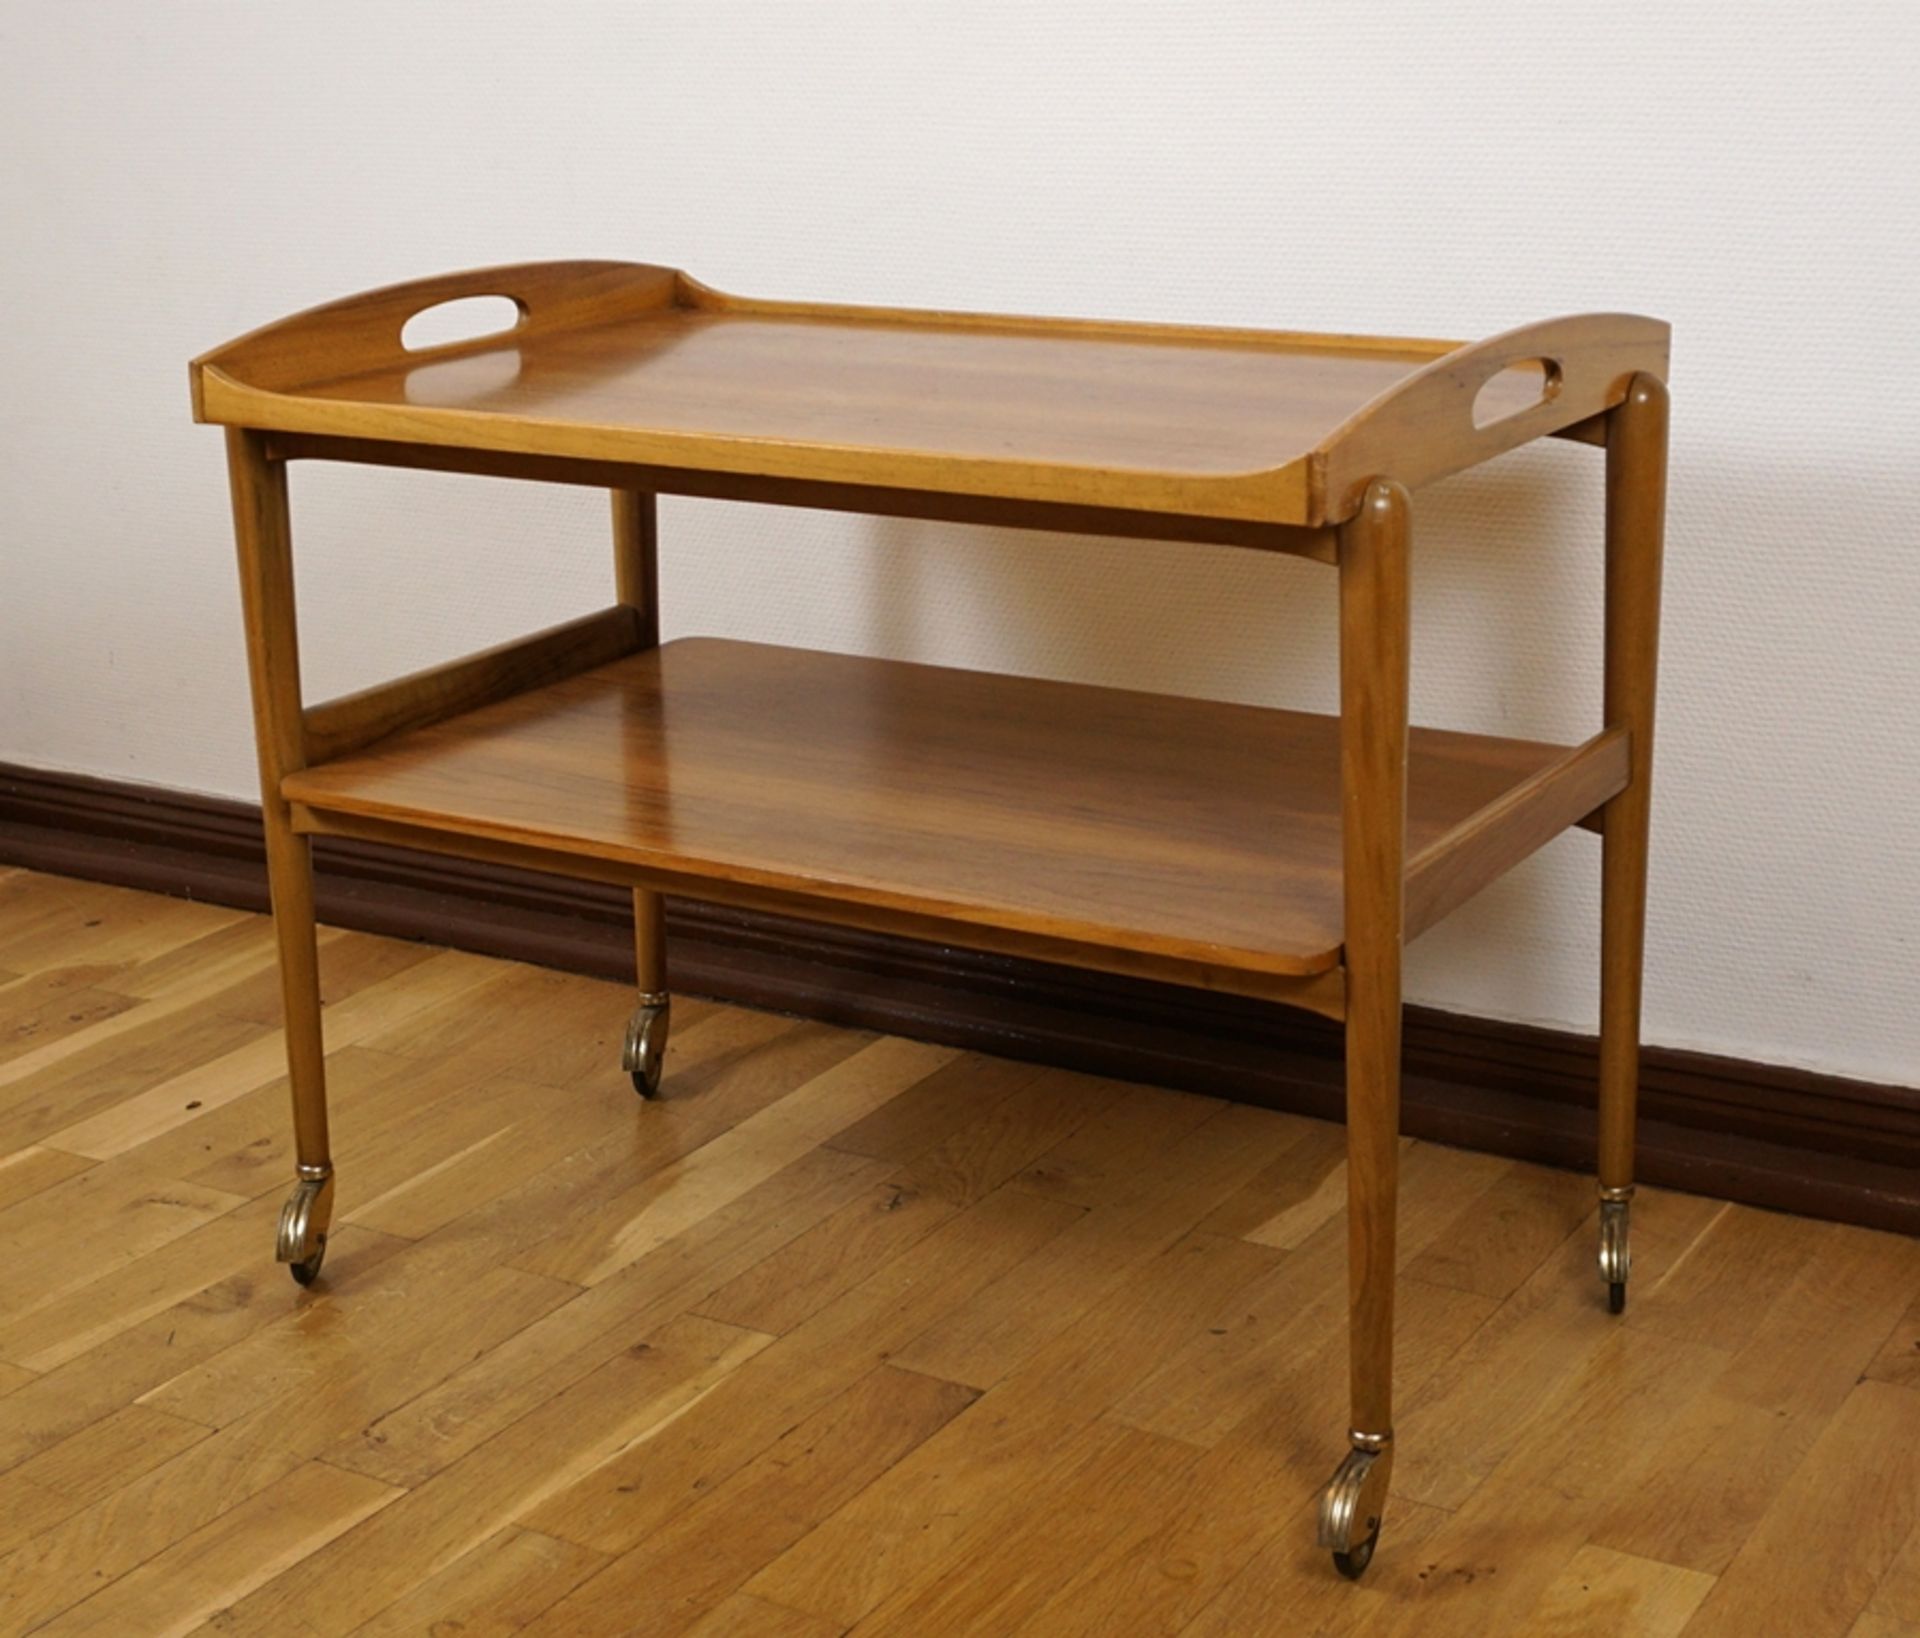 Serving trolley with tray, walnut, 1960s - Image 2 of 3